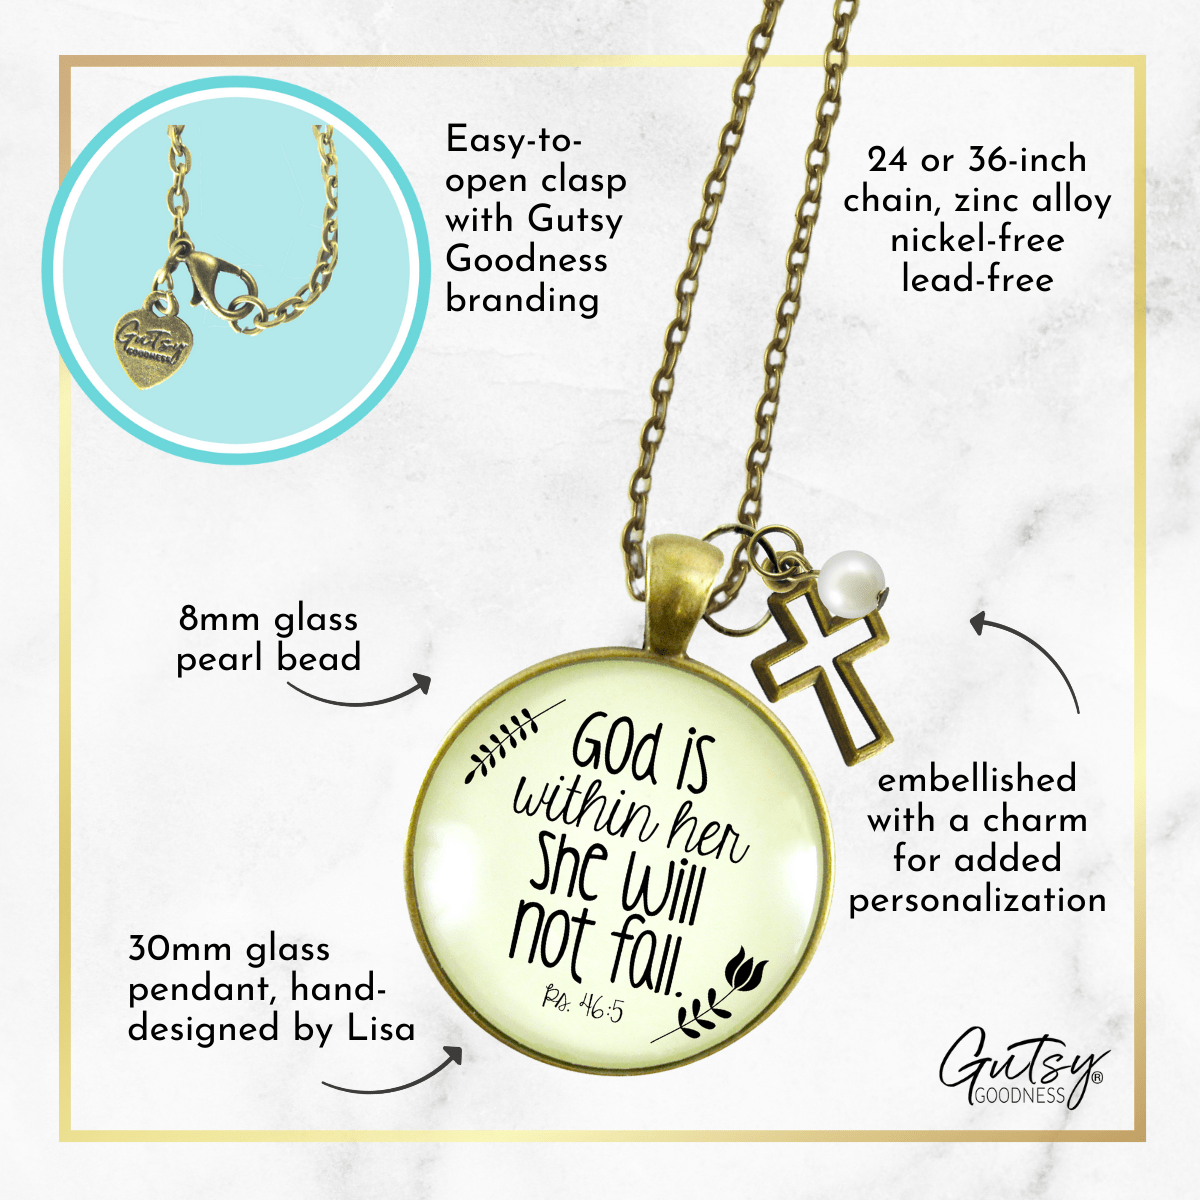 Gutsy Goodness Faith Necklace God is Within Her Psalm Quote Saying Womens Reminder Jewelry - Gutsy Goodness;Faith Necklace God Is Within Her Psalm Quote Saying Womens Reminder Jewelry - Gutsy Goodness Handmade Jewelry Gifts